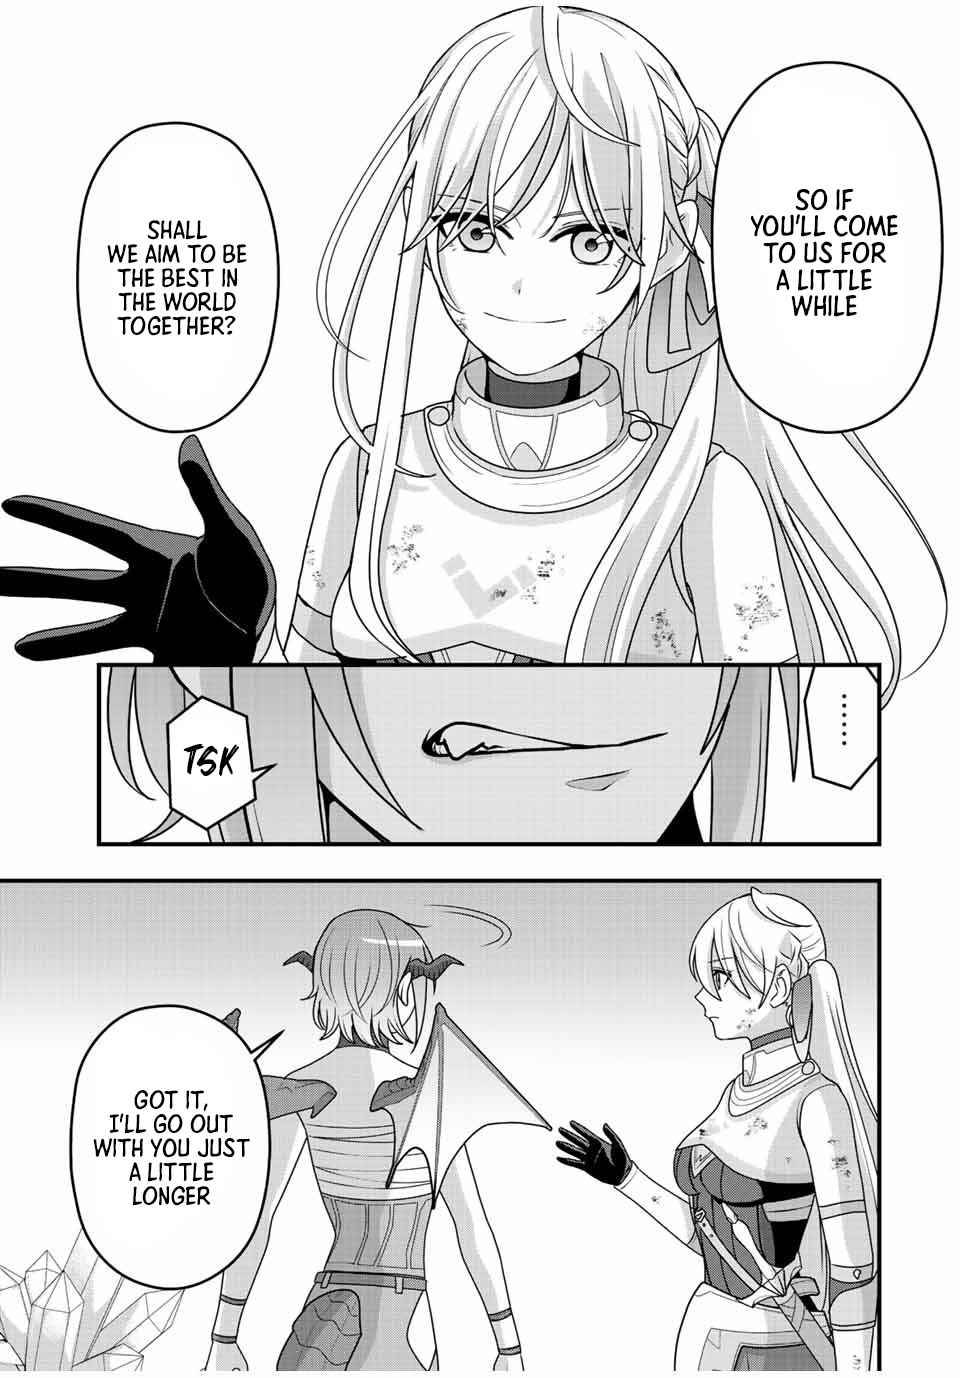 The Story Of The Banisher Side After Banishing The Party Member - The Party Was Weakened, But We Aim To Be The Best In The World Chapter 5-eng-li - Page 6